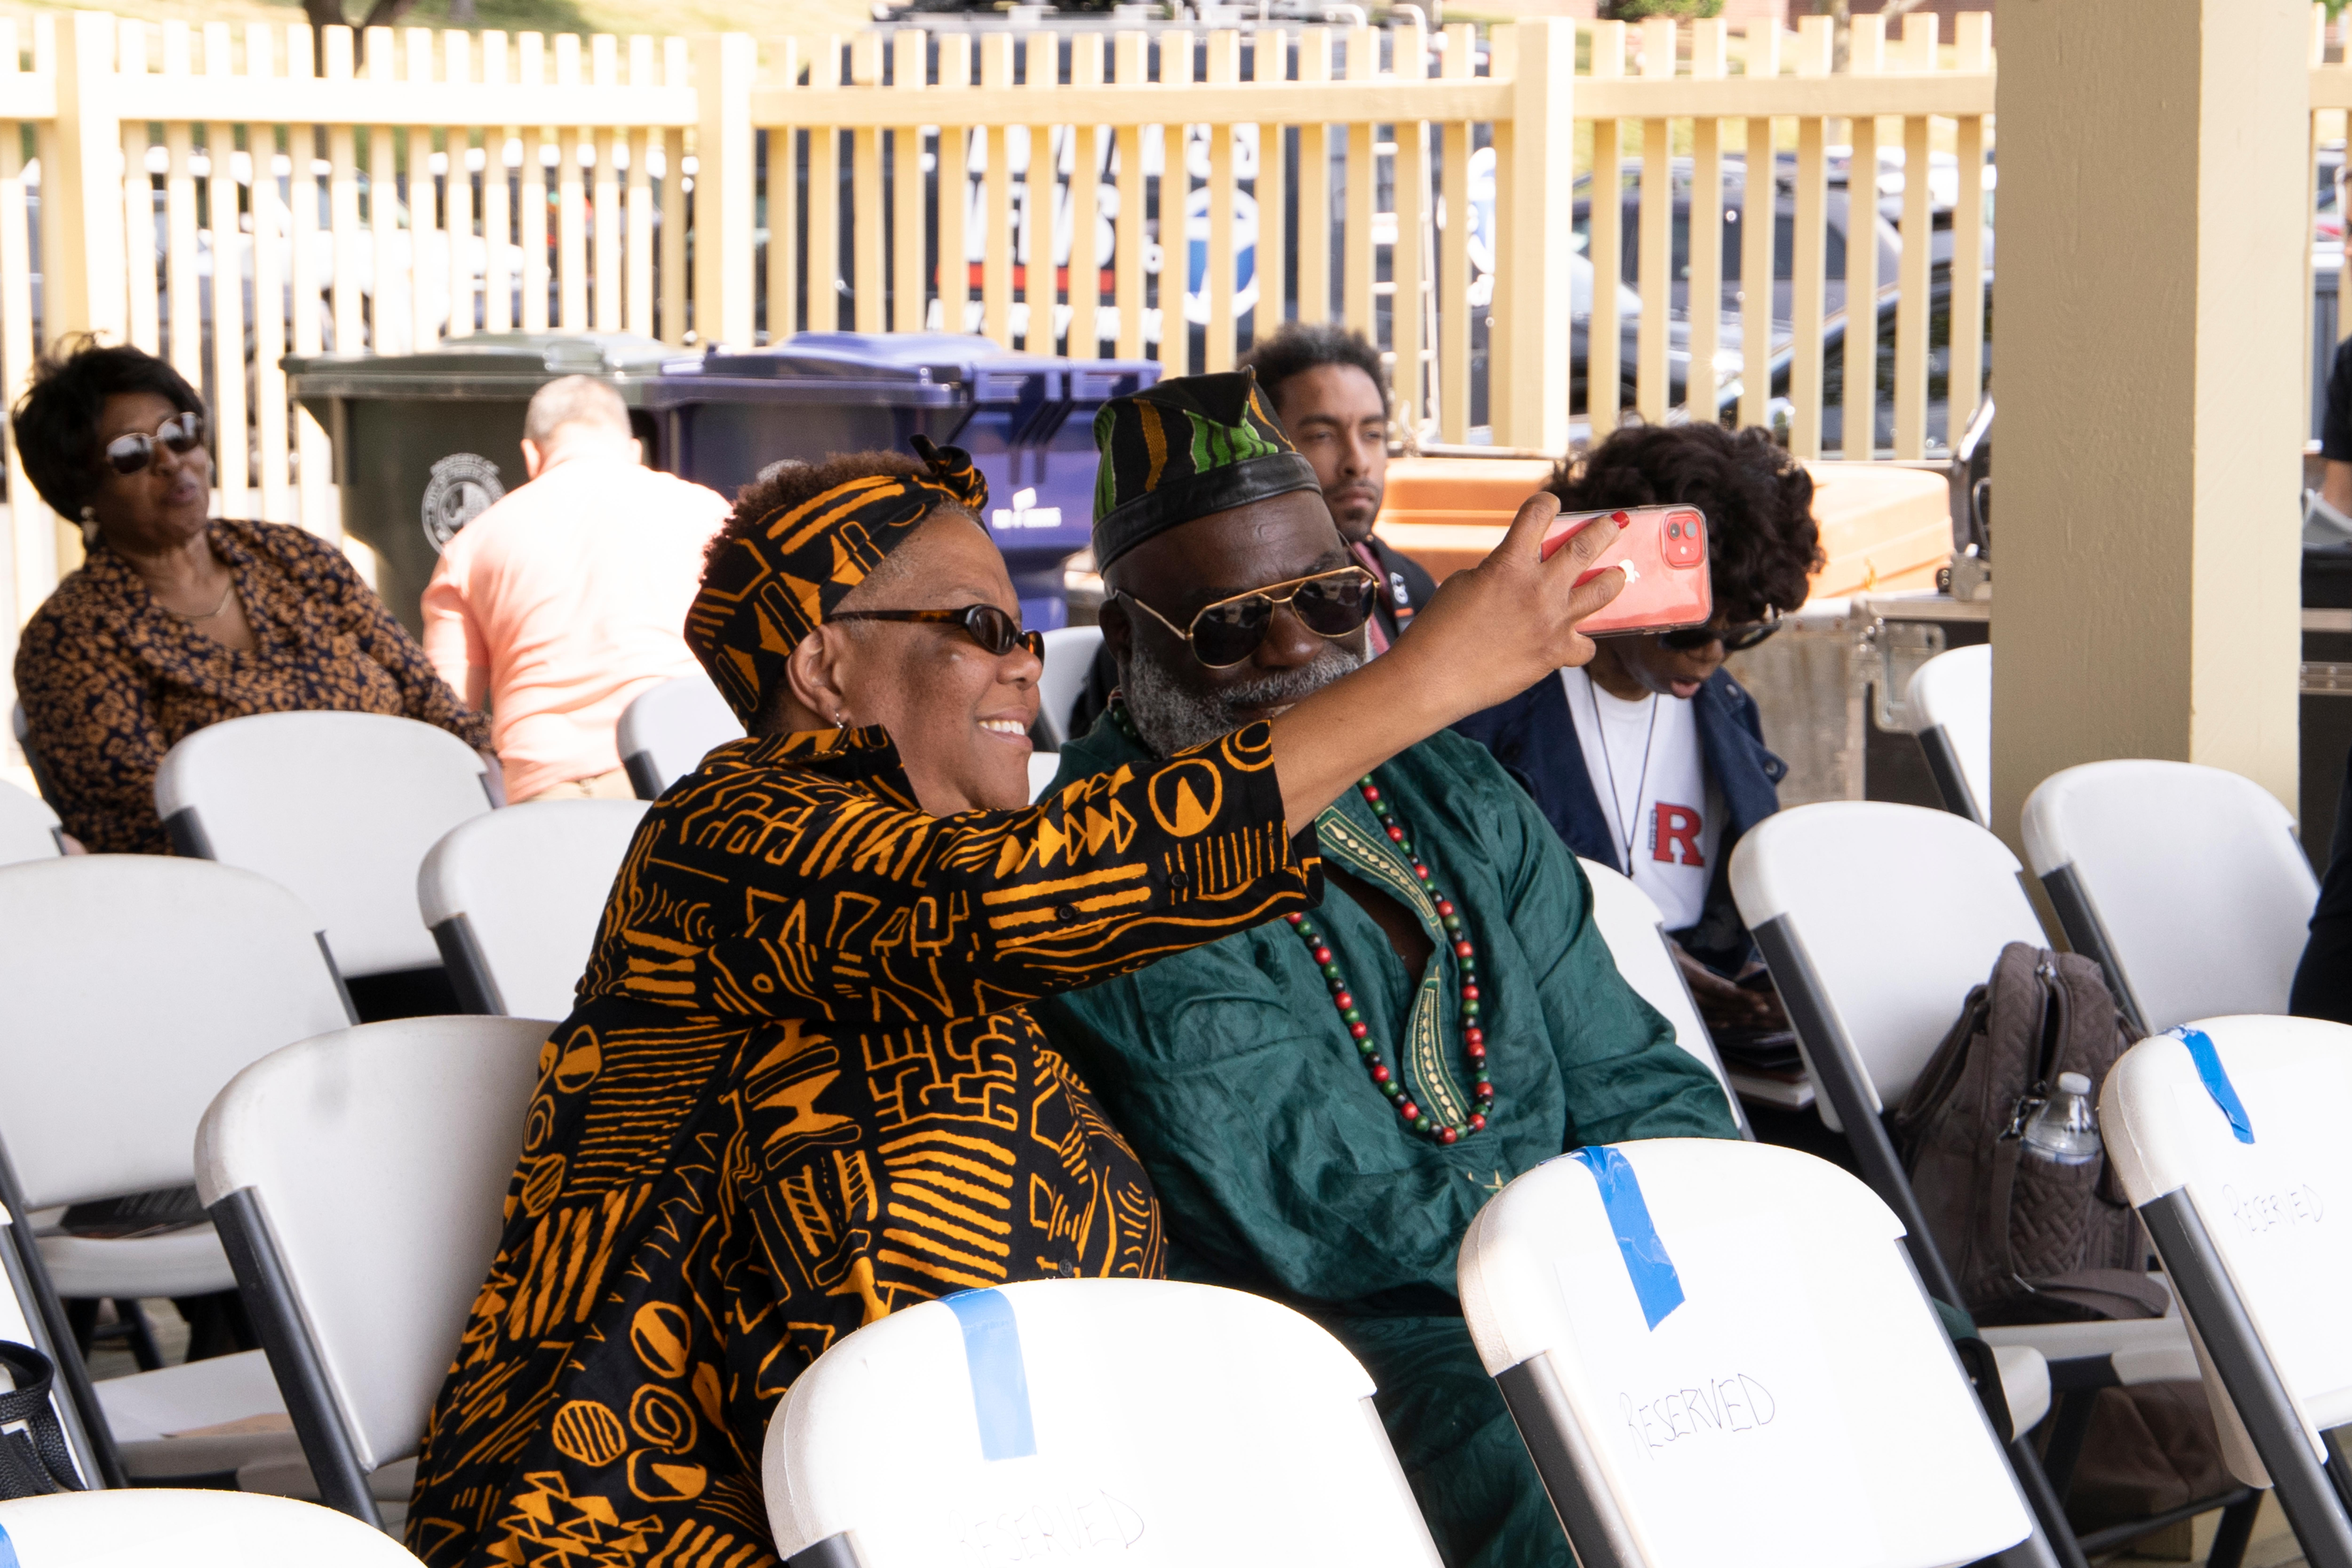 Two people take a self-portrait at the launching of the Reparations Council at the Perth Amboy Ferry Slip, as people gather to celebrate Juneteenth in Perth Amboy, New Jersey on Monday, June 19, 2023.